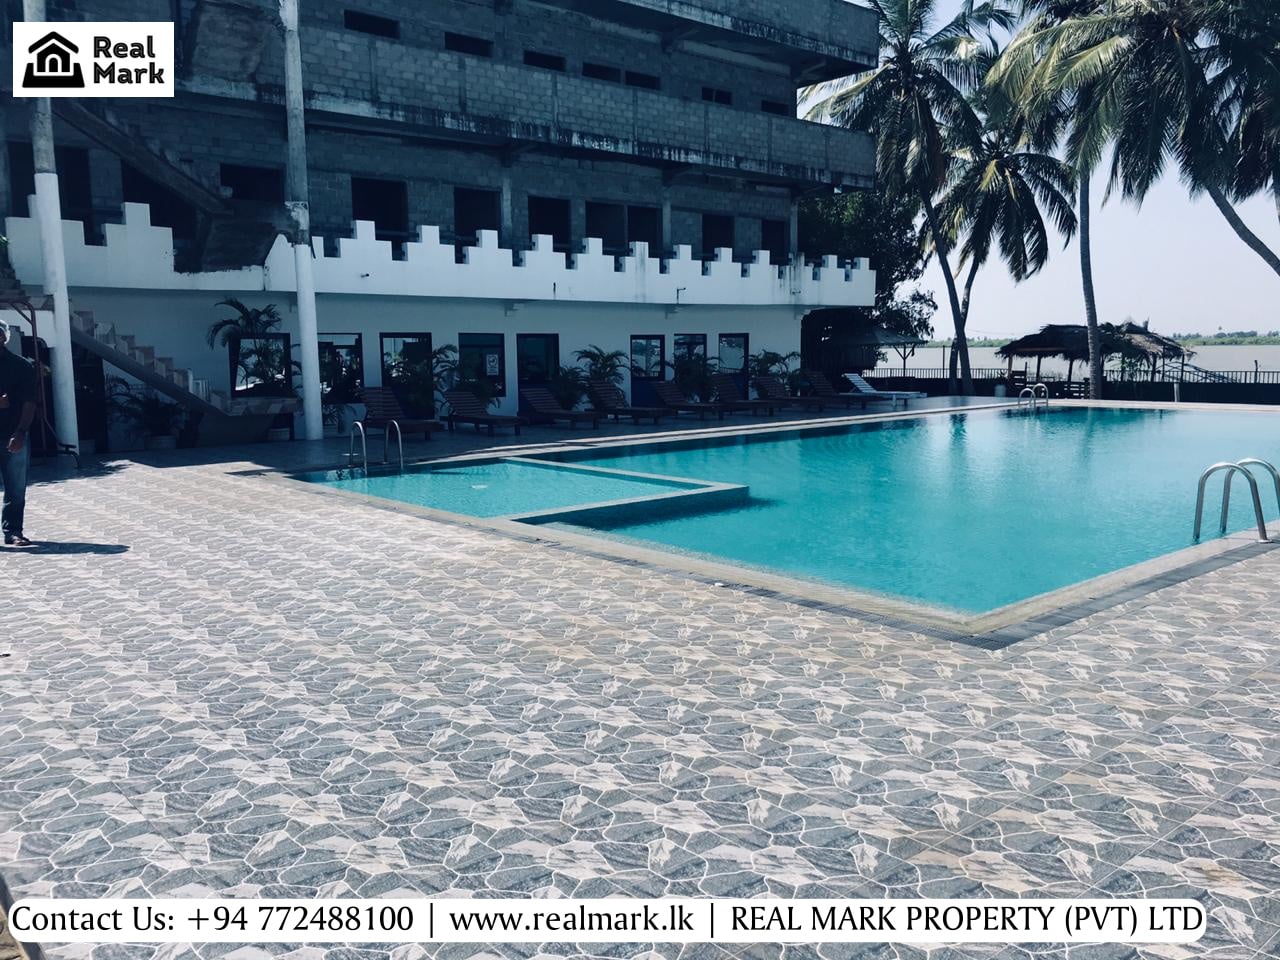 Facing the waters of Batticaloa bay, multi building hotel for sale in Batticaloa is up for sale.